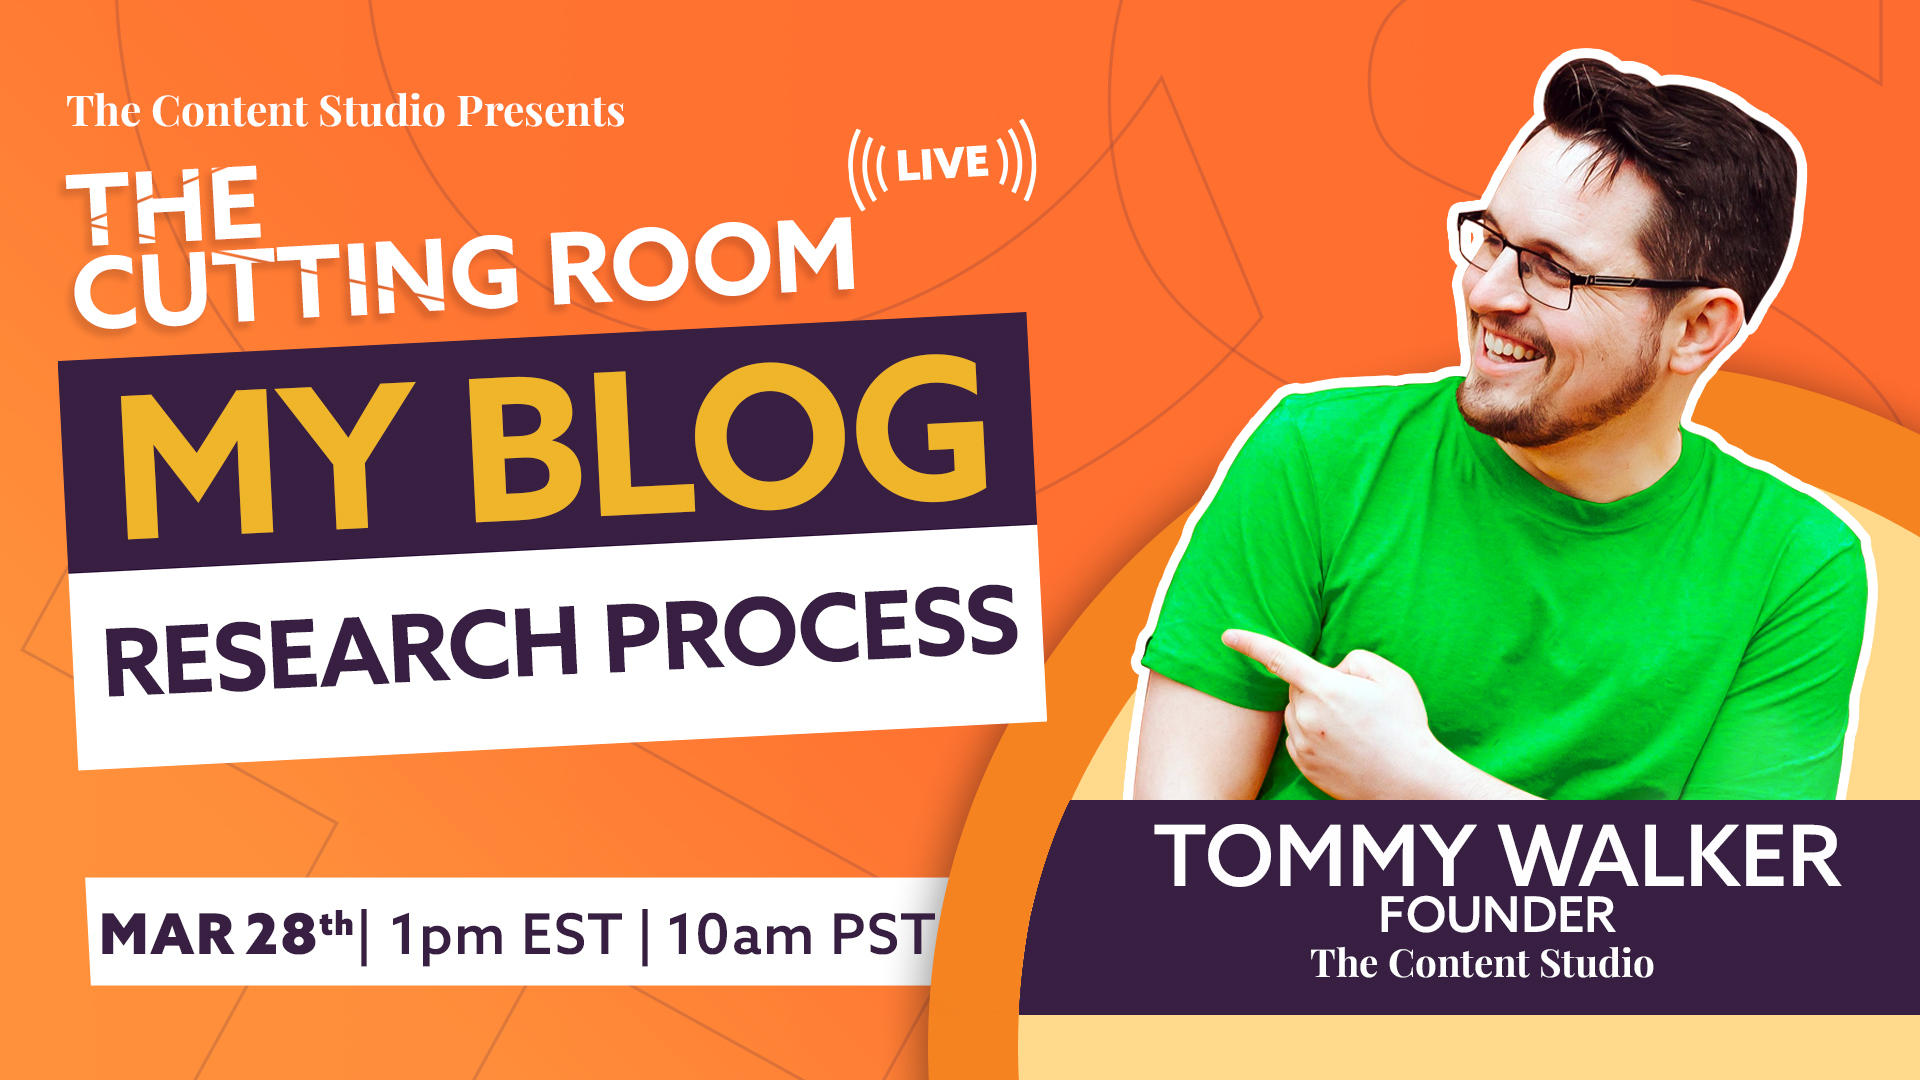 Tommy Walker shares his blog research process.